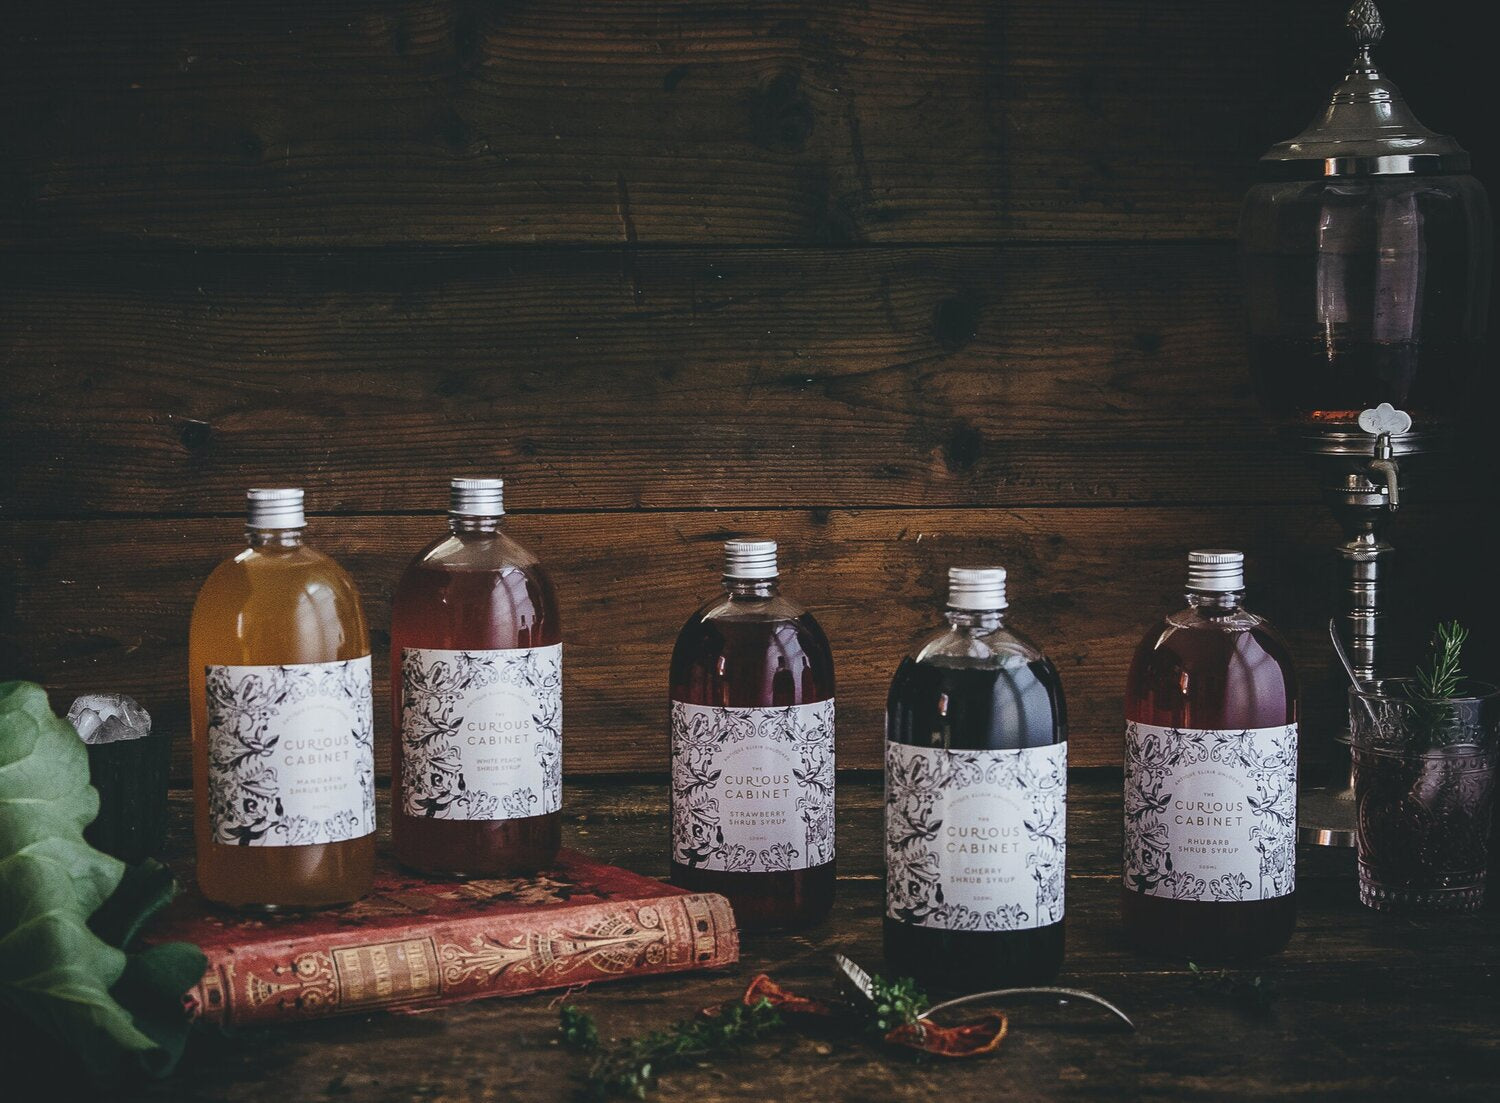 The Curious Cabinet Syrups